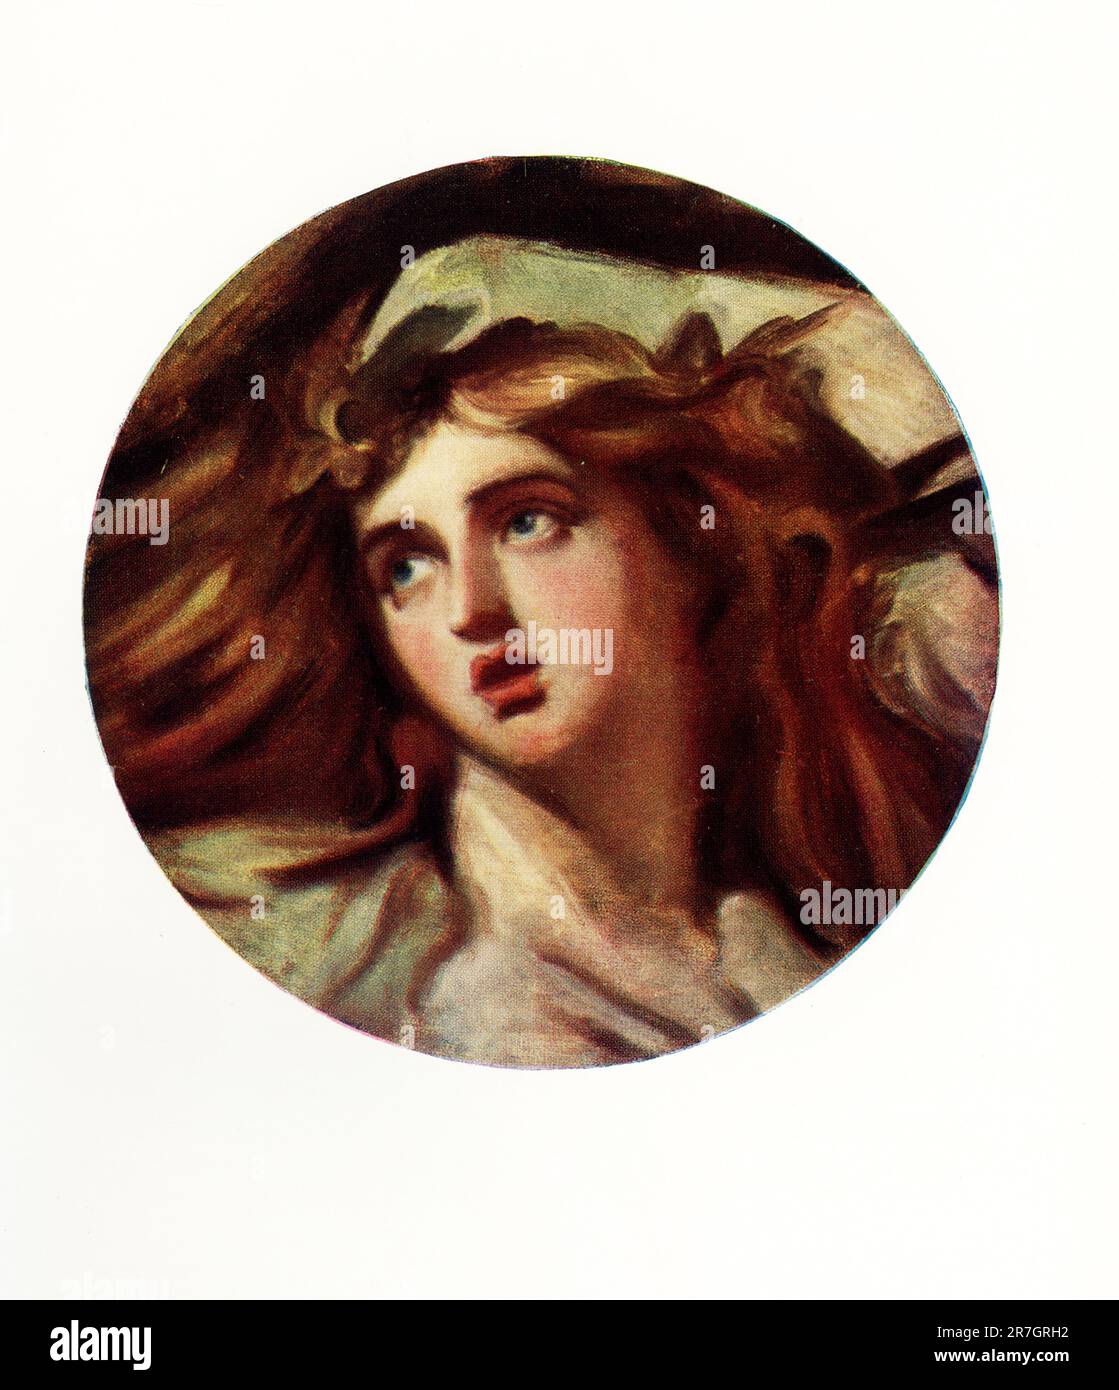 The esaly 1900s caption reads: 'Sketch Portrait of Lady Hamilton by George Romney. Her rich brown hair falls in tempestuous disorder over a pillow; the mouth is open; the eyes are as near to tragedy as the volatile Emma could go. This sketch (circular, 1 foot 6 inches) was presented to the National gallery in 1989. George Romney (1734-1802) was an English portrait painter. He was the most fashionable artist of his day, painting many leading society figures – including his artistic muse, Emma Hamilton, mistress of Lord Nelson.' George Romney (1734-1802) was an English portrait painter. He was t Stock Photo